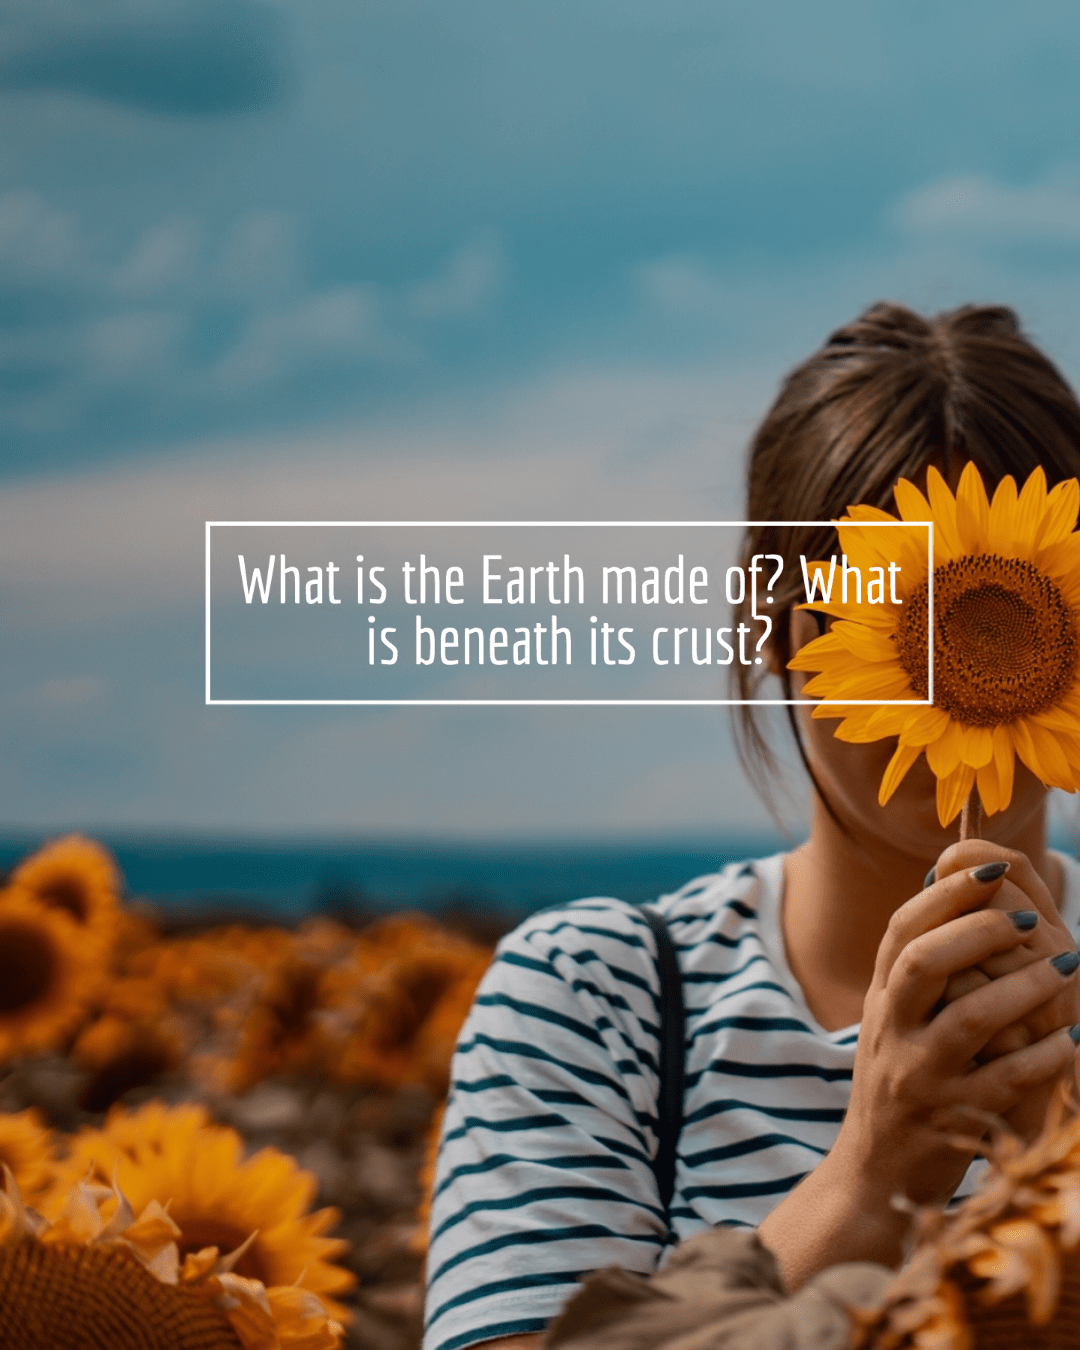 What is the Earth made of? What is beneath its crust?